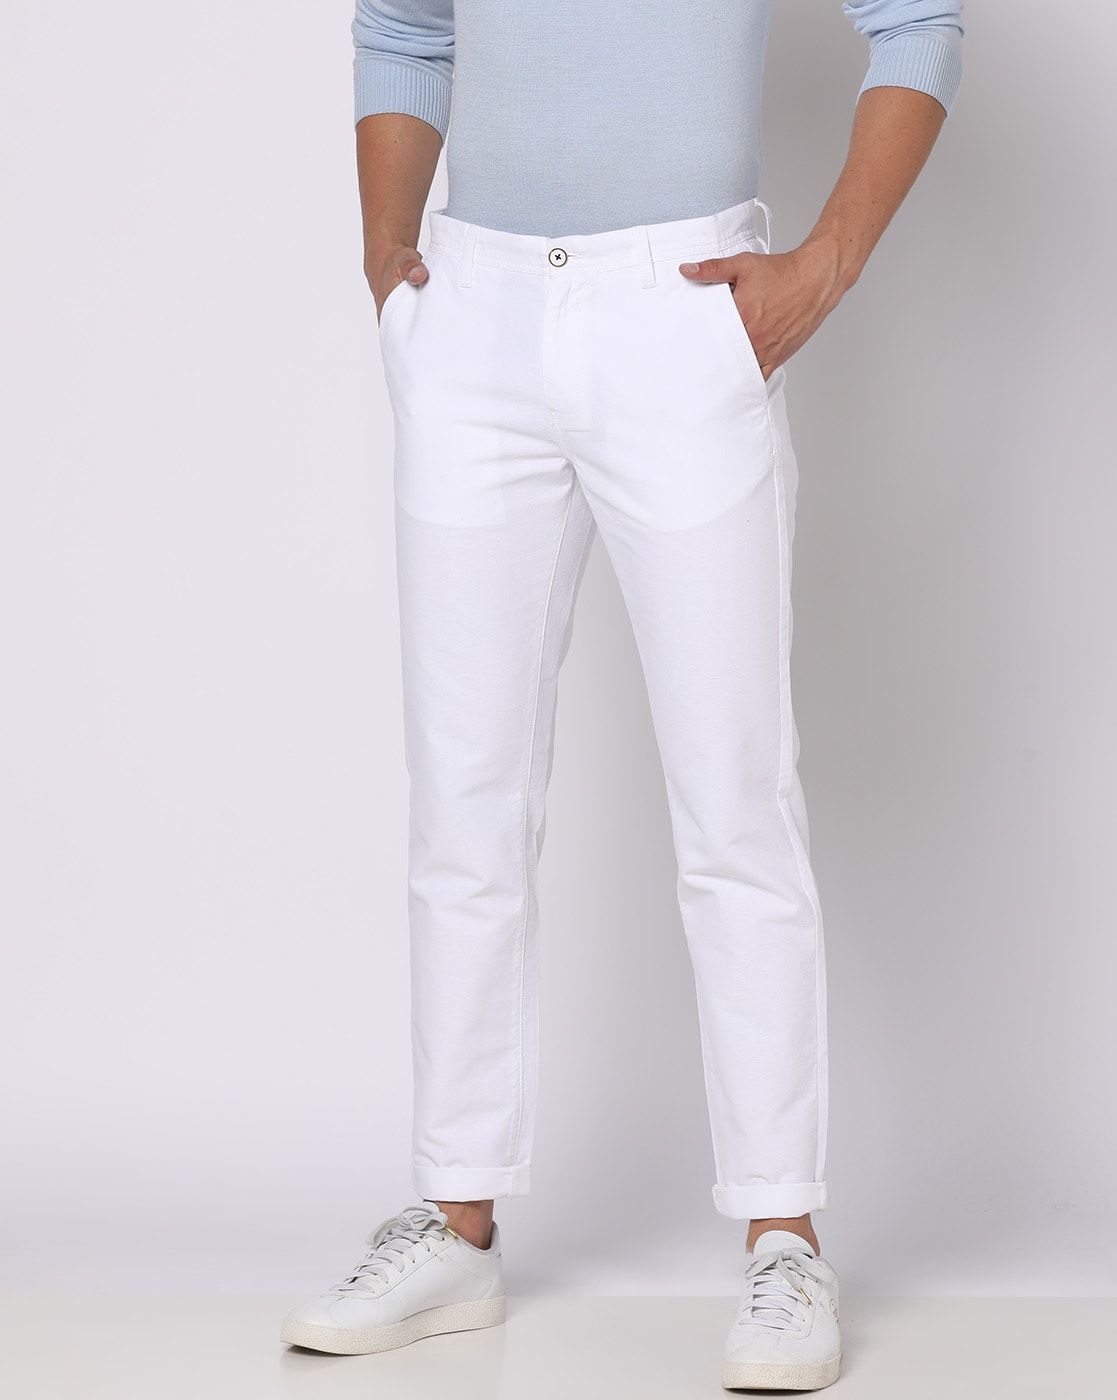 Buy Mens Trousers Mens White Trousers Mens Loose Trousers Mens Online in  India  Etsy